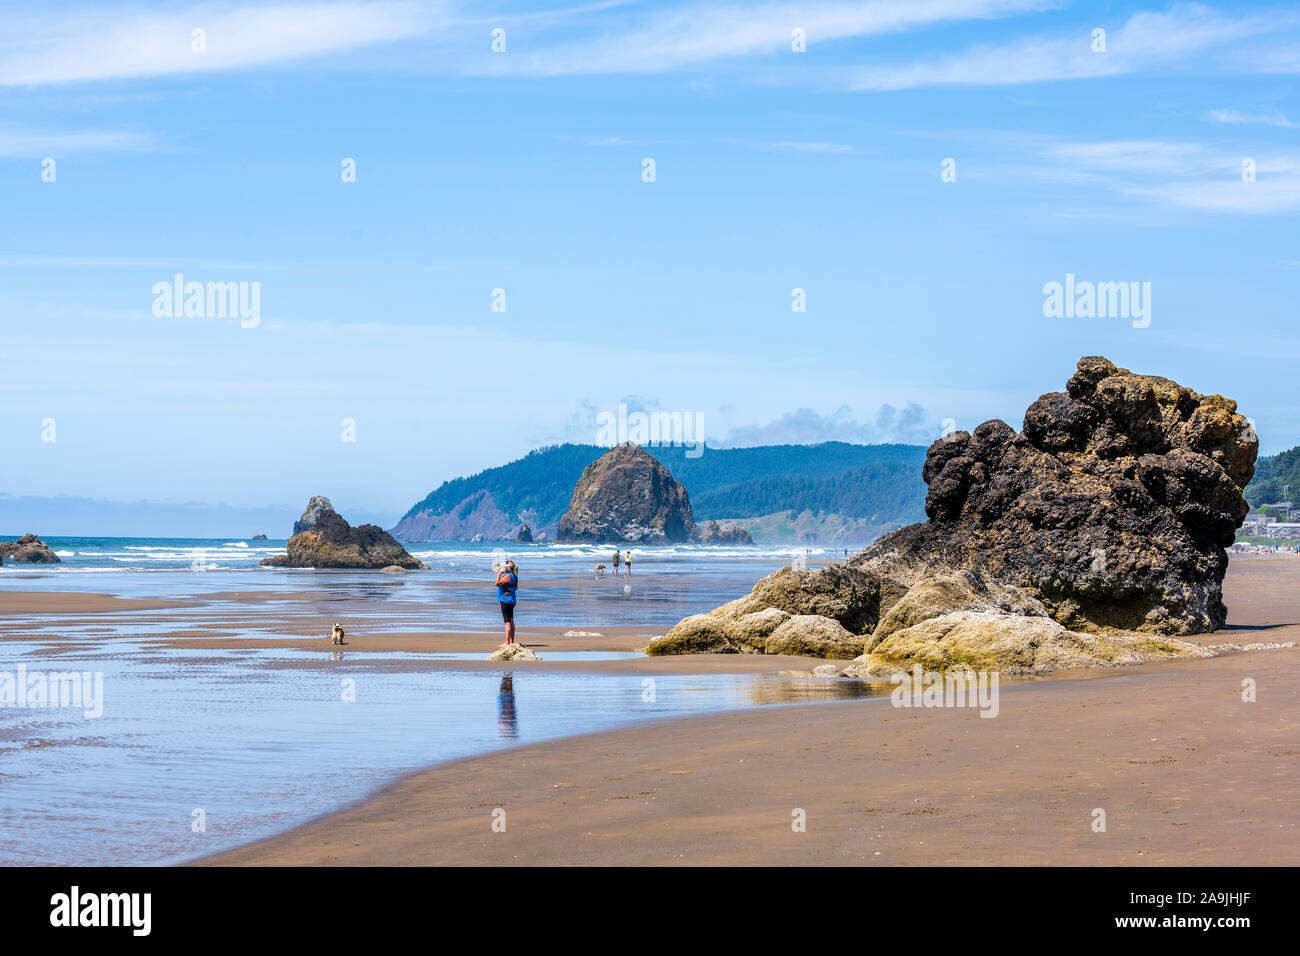 Woman with a dog and other people are walking on the waterline in the Northwest of the Pacific ocean coast with fancy rocks sticking out of the water Stock Photo